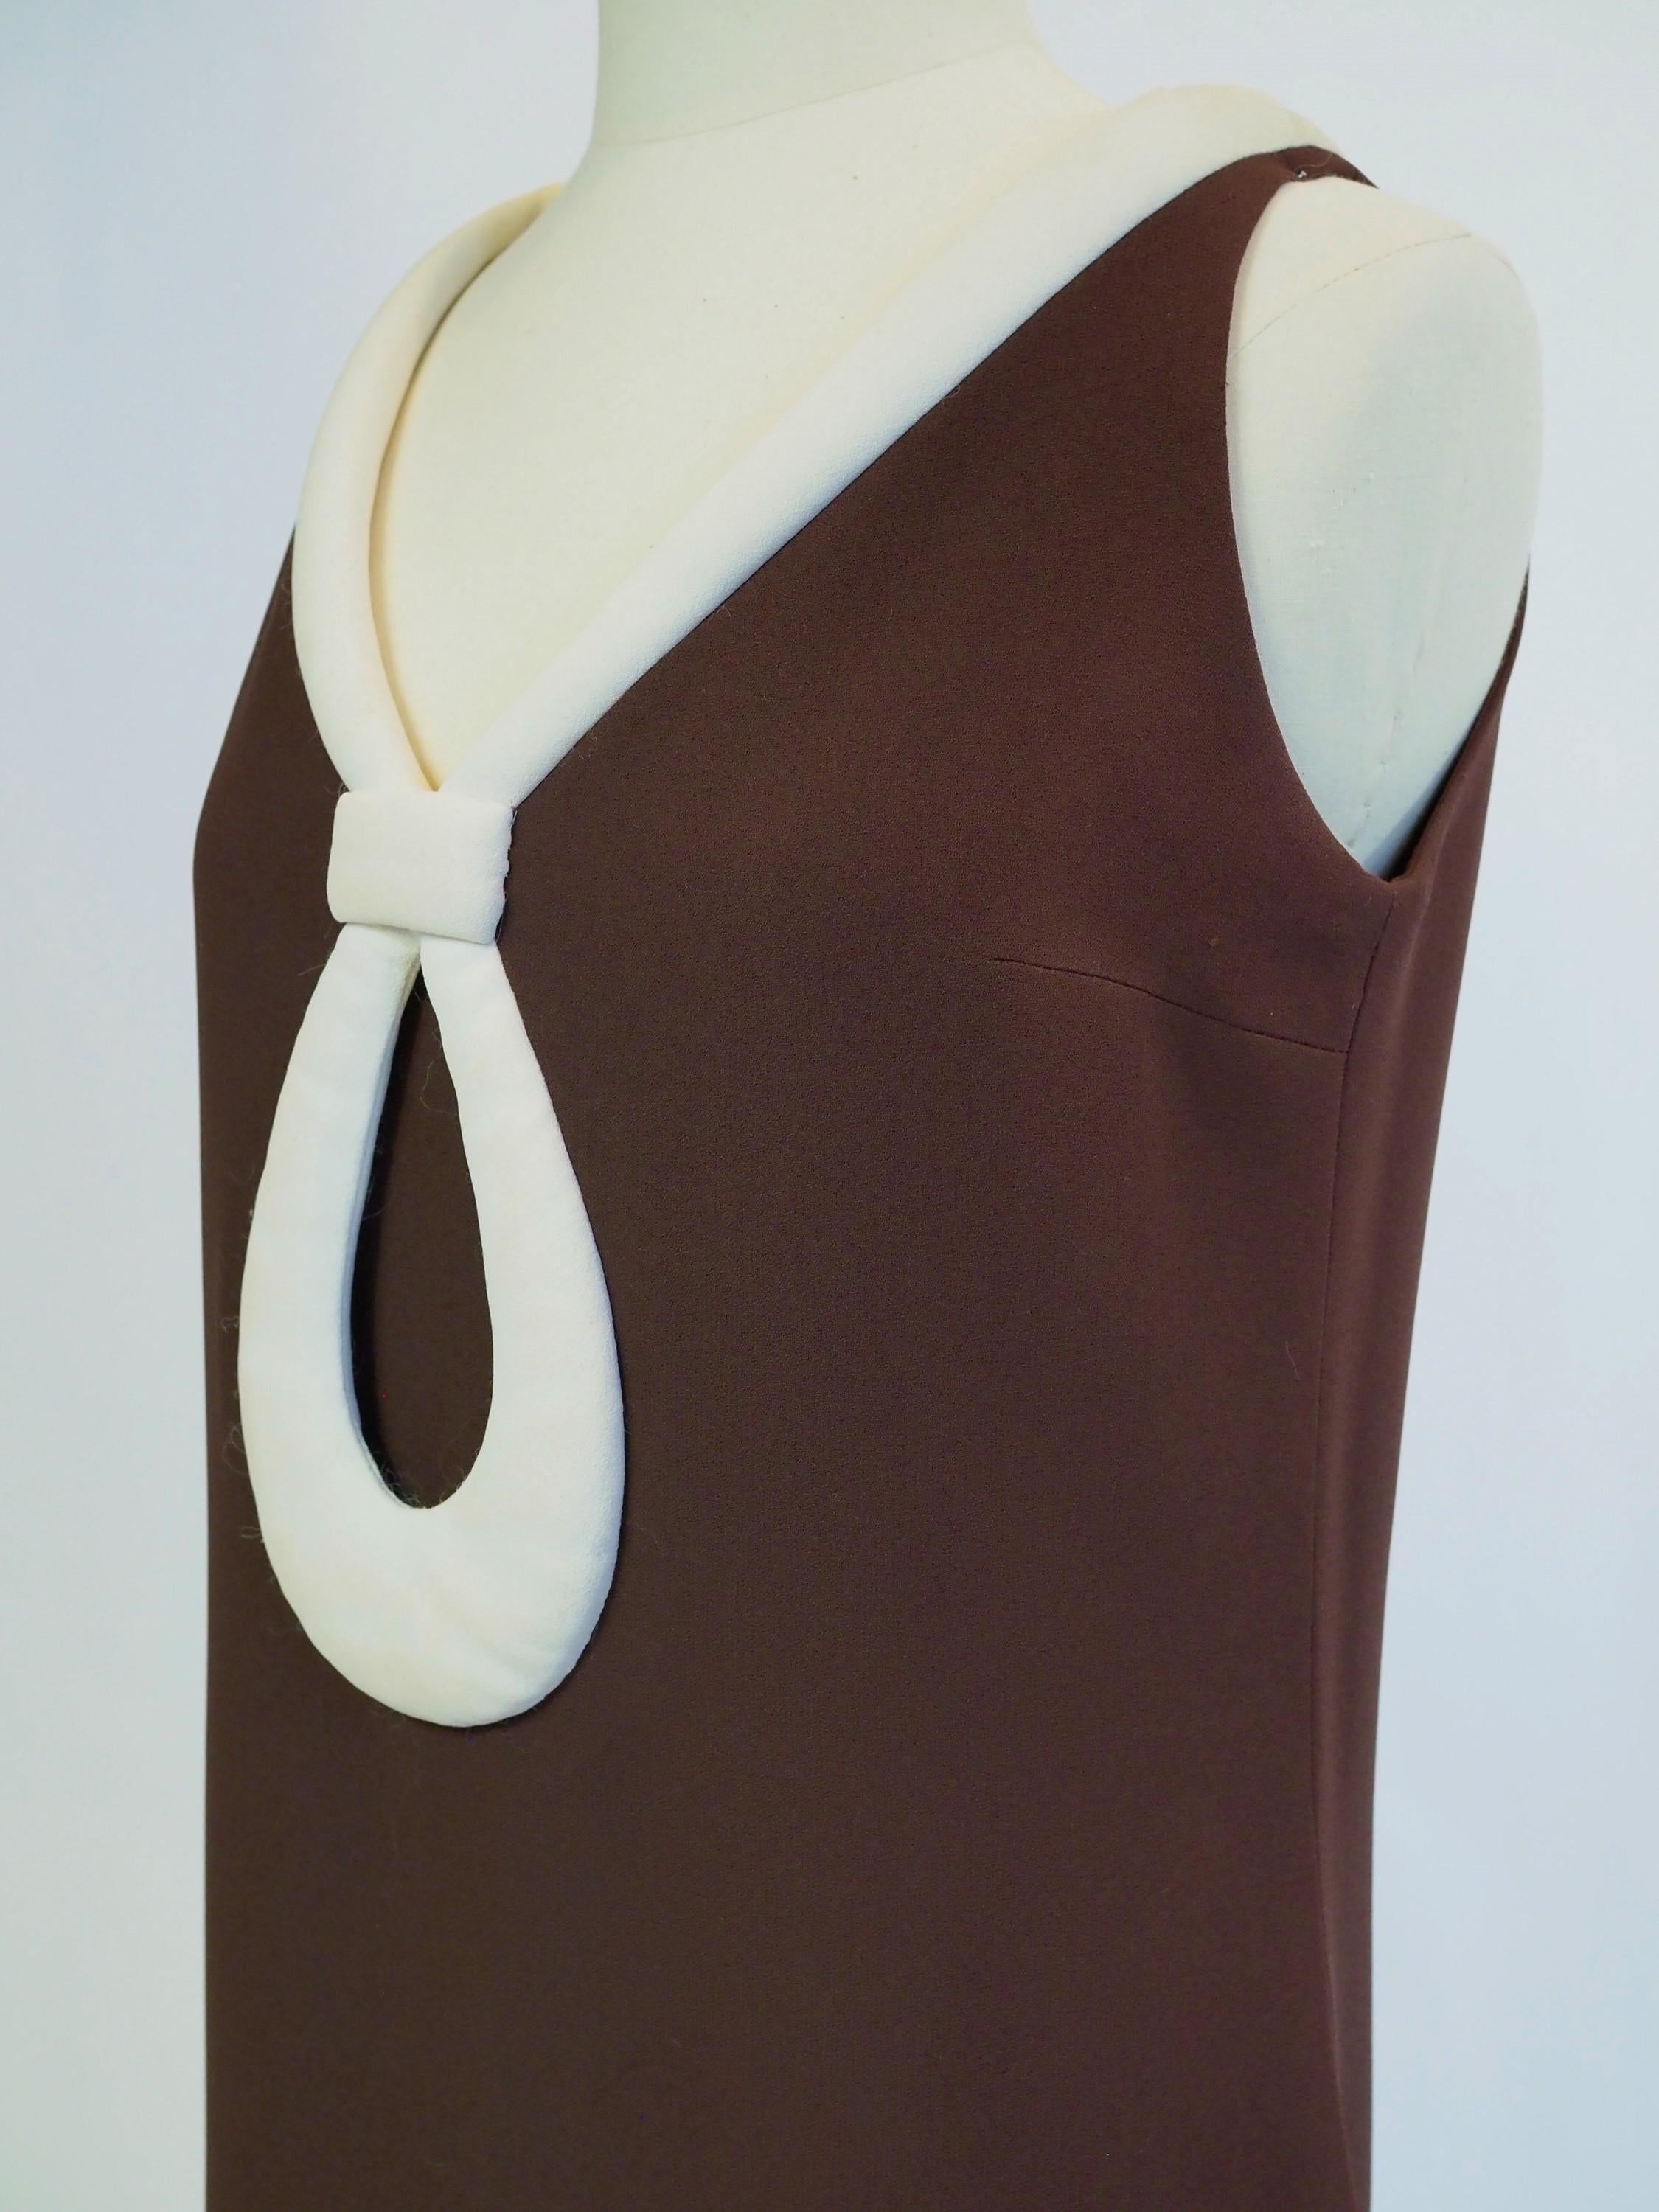 A Space Age Pierre Cardin Dress in chocolate jersey Circa 1970/1975 For Sale 4